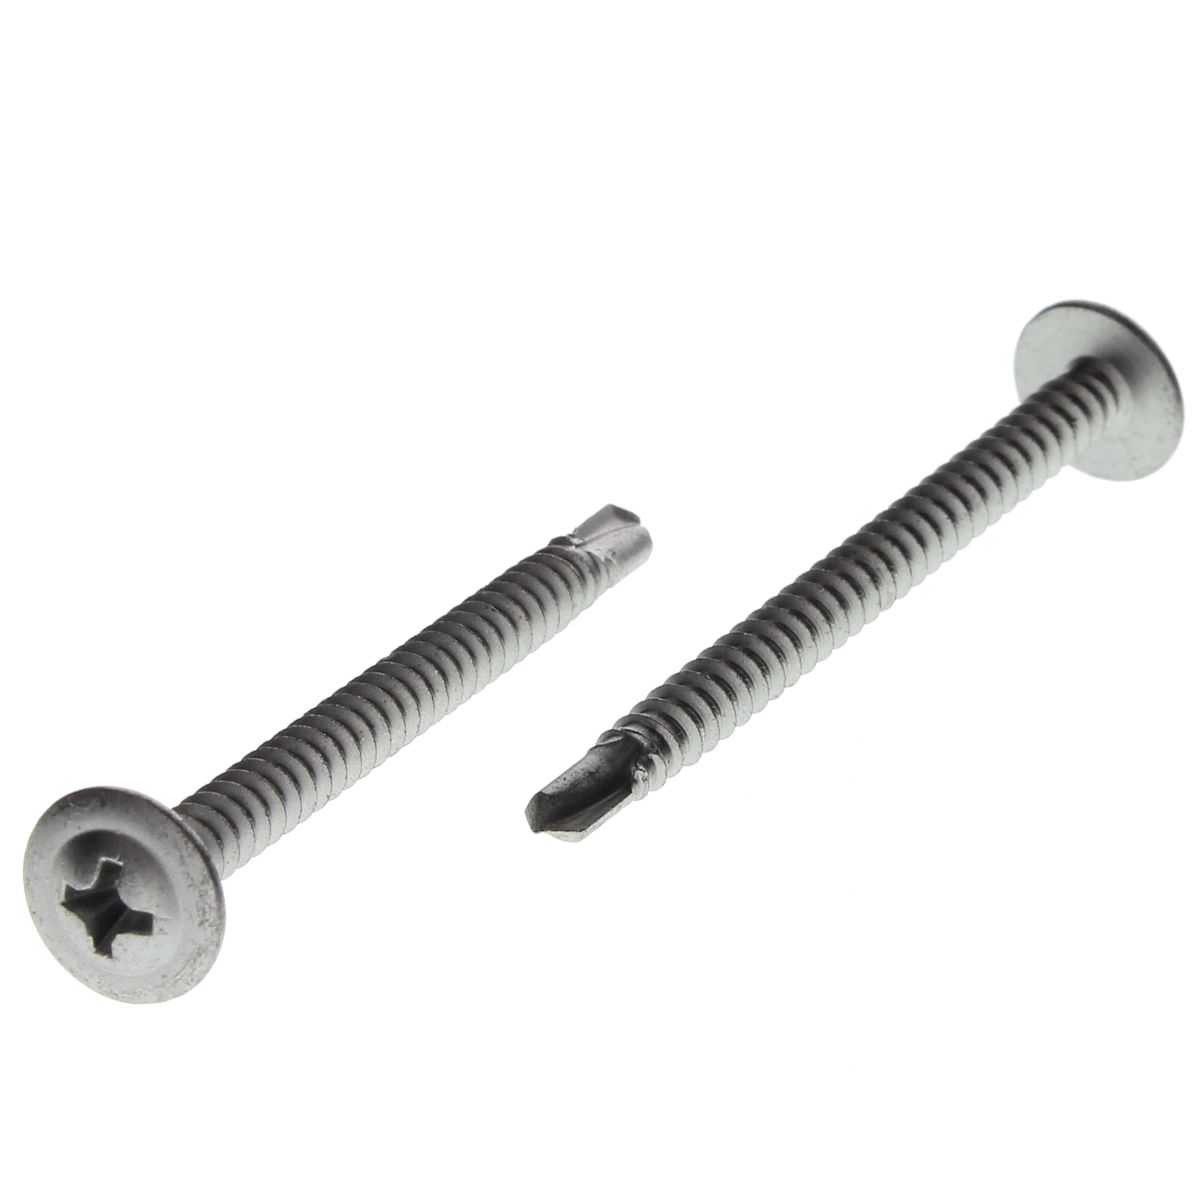 #8-18 x 9/16" Round Washer Hd Phillips Self-Drilling Screws 410 Stainless Steel Ty 2 Point 100/PKG